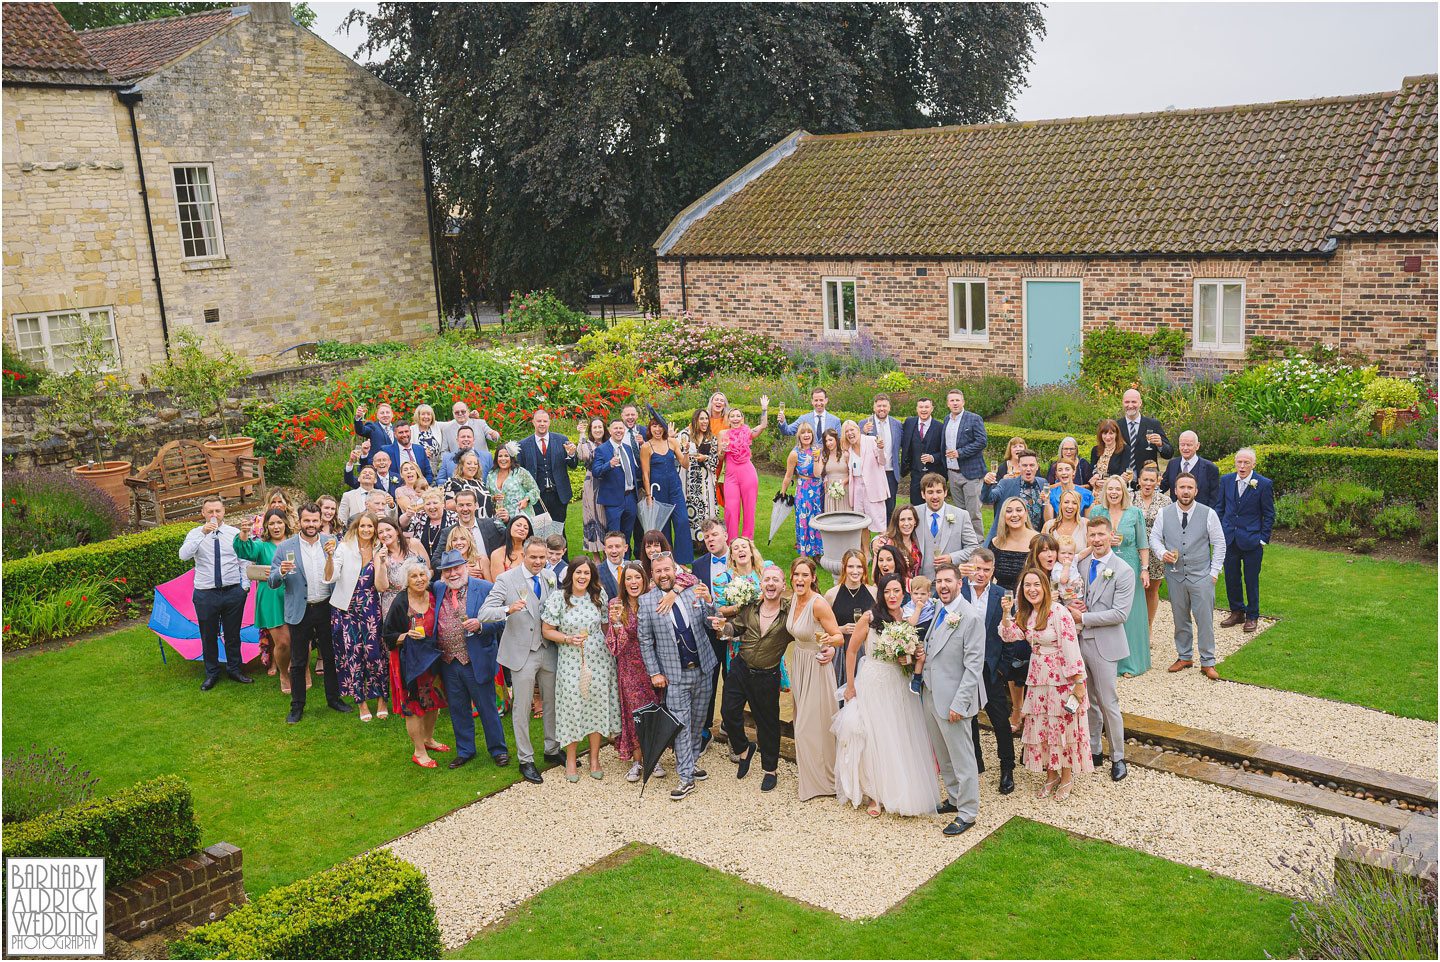 Priory Cottages Wedding, Group Photo at Priory Cottages, Priory Barn Yorkshire Wedding Photographer, Priory Cottages Wedding Photos, Priory Farm and Cottages Wedding, Yorkshire Wedding Photographer